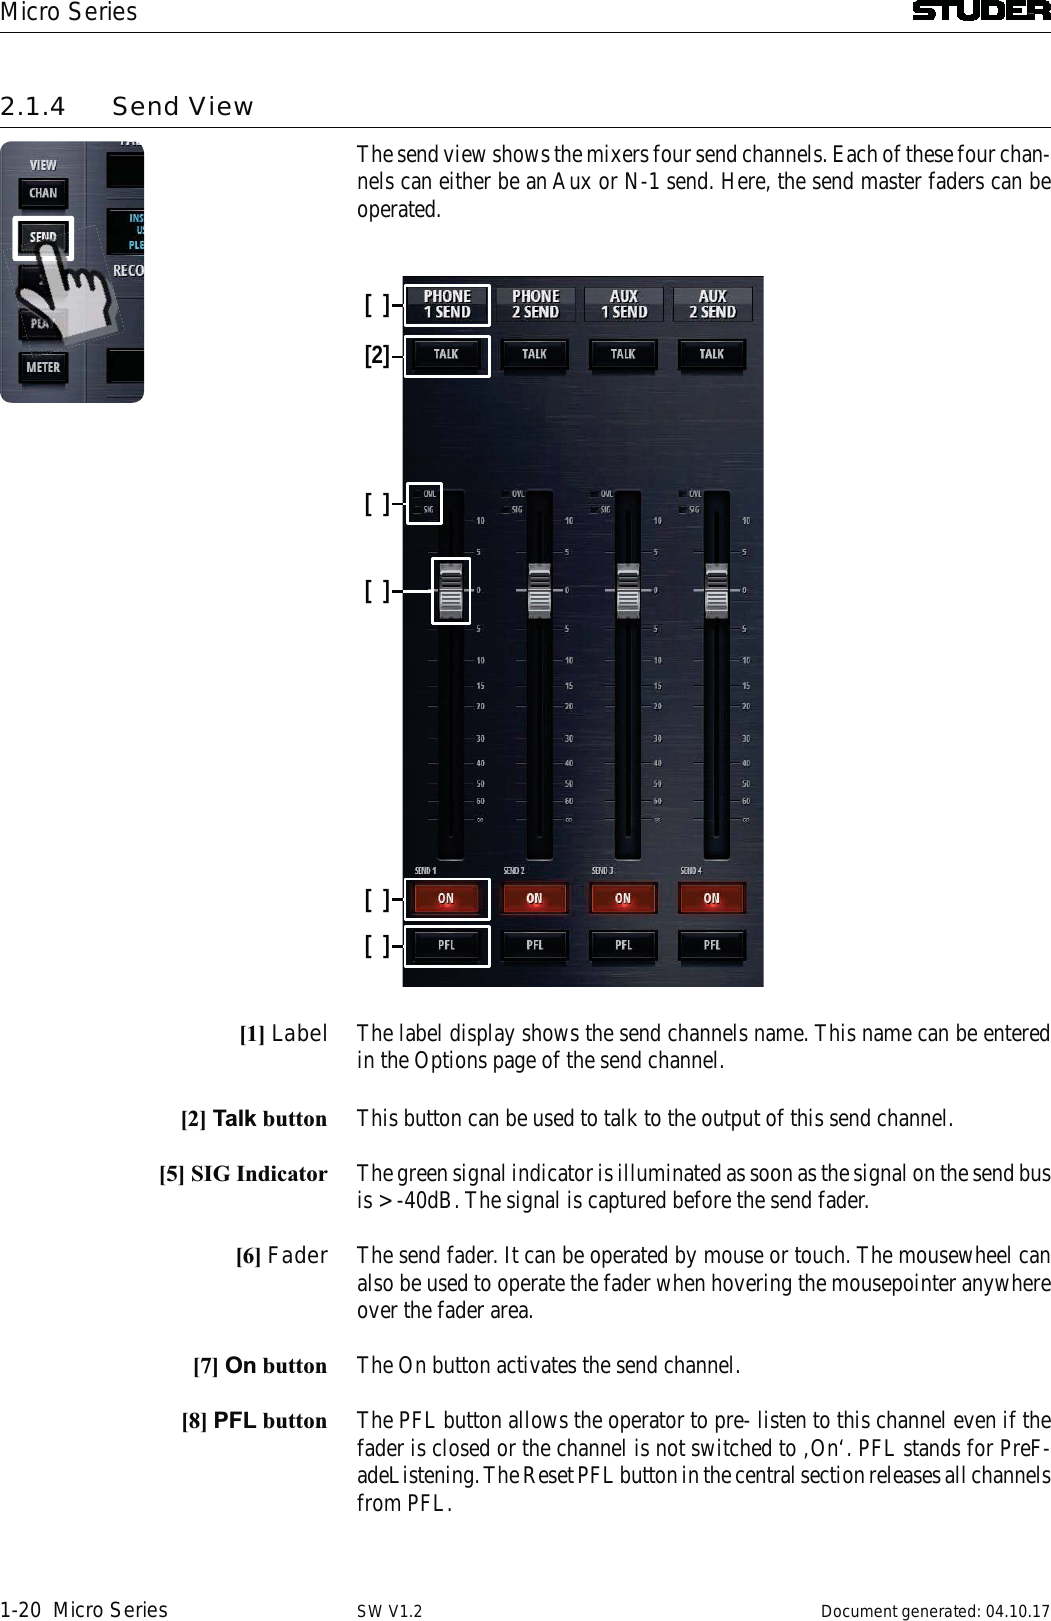 Micro Series1-20  Micro Series Document generated: 04.10.17SW V1.22.1.4 Send ViewThe send view shows the mixers four send channels. Each of these four chan-nels can either be an Aux or N-1 send. Here, the send master faders can be operated.[][2][][][][][1] Label The label display shows the send channels name. This name can be entered in the Options page of the send channel. [2] Talk button This button can be used to talk to the output of this send channel. [5] SIG Indicator The green signal indicator is illuminated as soon as the signal on the send bus is &gt; -40dB. The signal is captured before the send fader.[6] Fader The send fader. It can be operated by mouse or touch. The mousewheel can also be used to operate the fader when hovering the mousepointer anywhere over the fader area.[7] On button The On button activates the send channel. [8] PFL button The PFL button allows the operator to pre- listen to this channel even if the fader is closed or the channel is not switched to ‚On‘. PFL stands for PreF-adeListening. The Reset PFL button in the central section releases all channels from PFL.